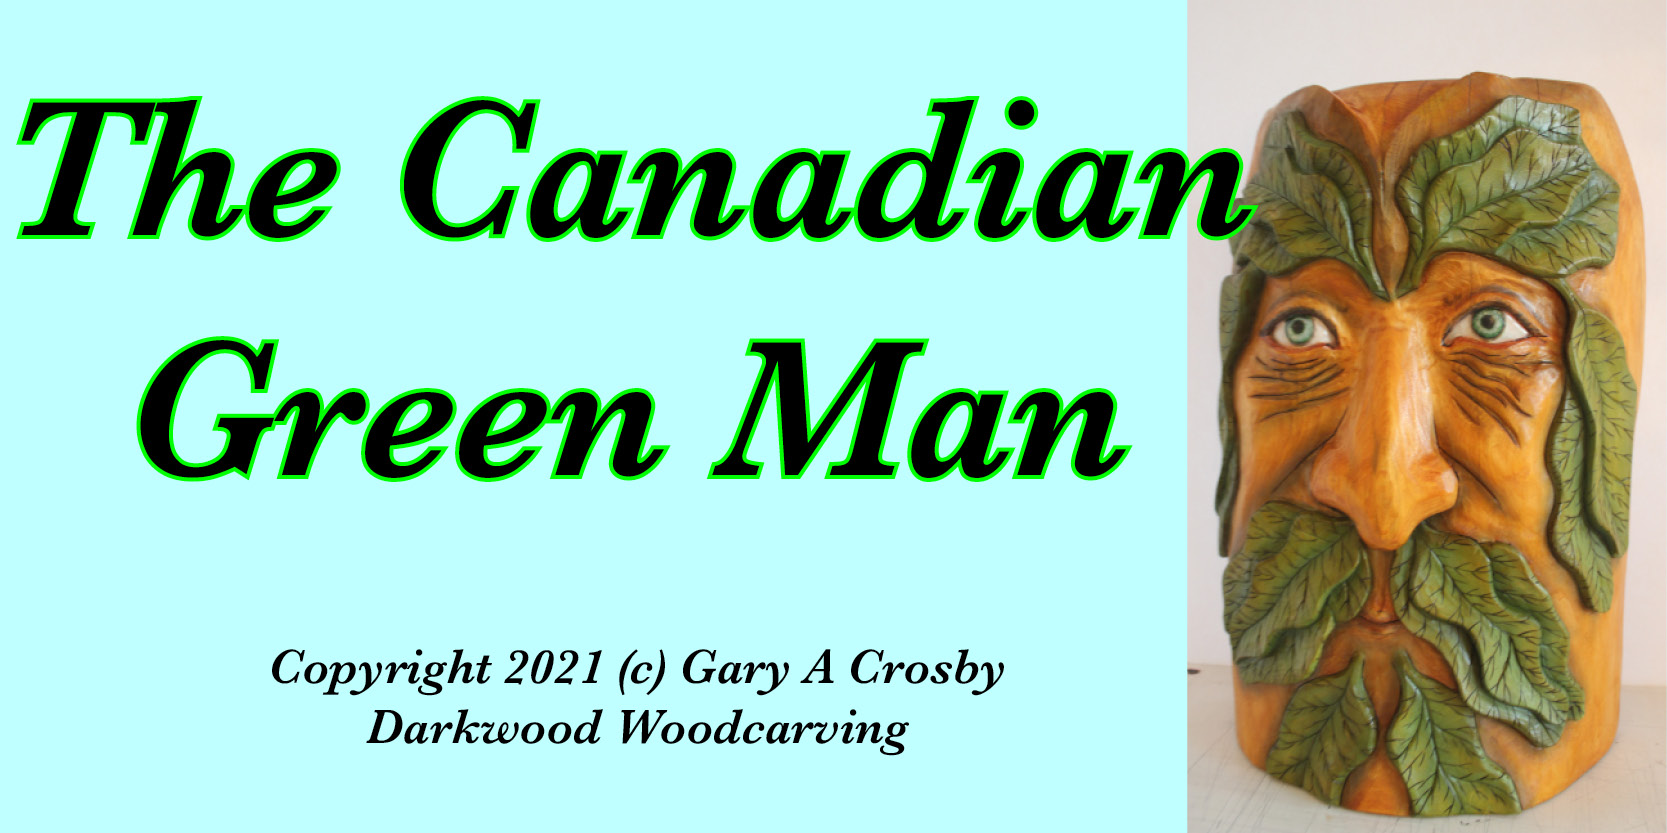 Greenman carving, greenman sculpture, one of a kind, art, table or wall art